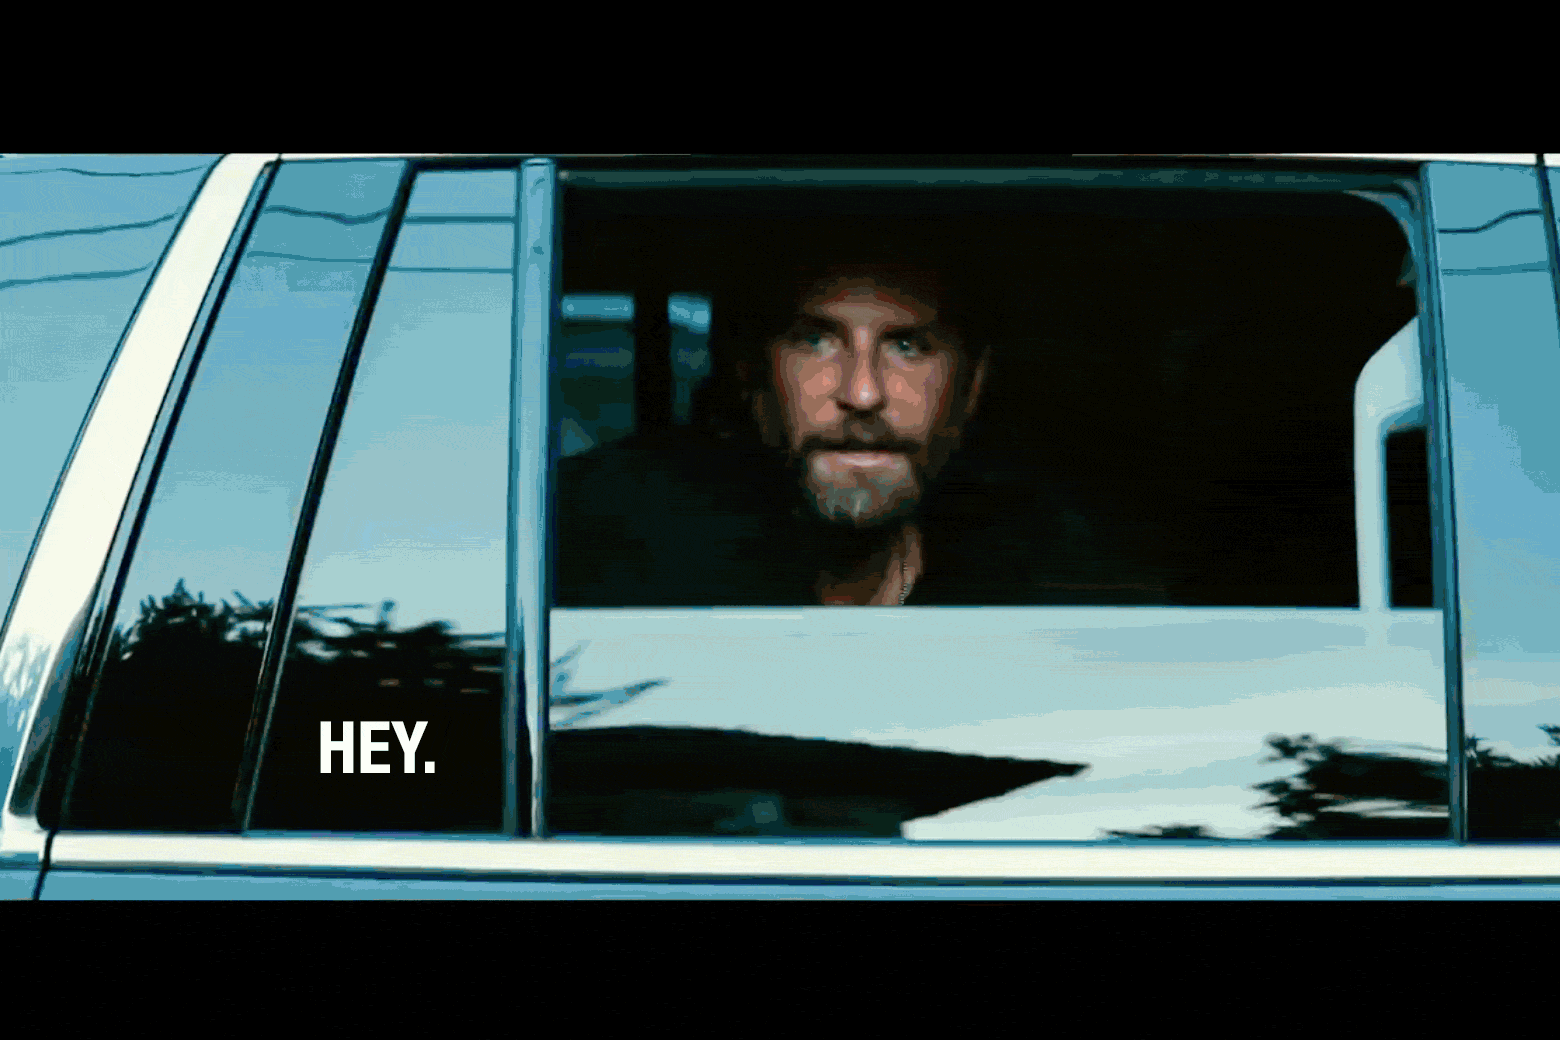 An animated take on the scene in A Star Is Born in which Jackson says "hey" to Ally before leaving in a car, except here he dangles a pair of no-show socks out the window. Ally smiles back, as in the movie.